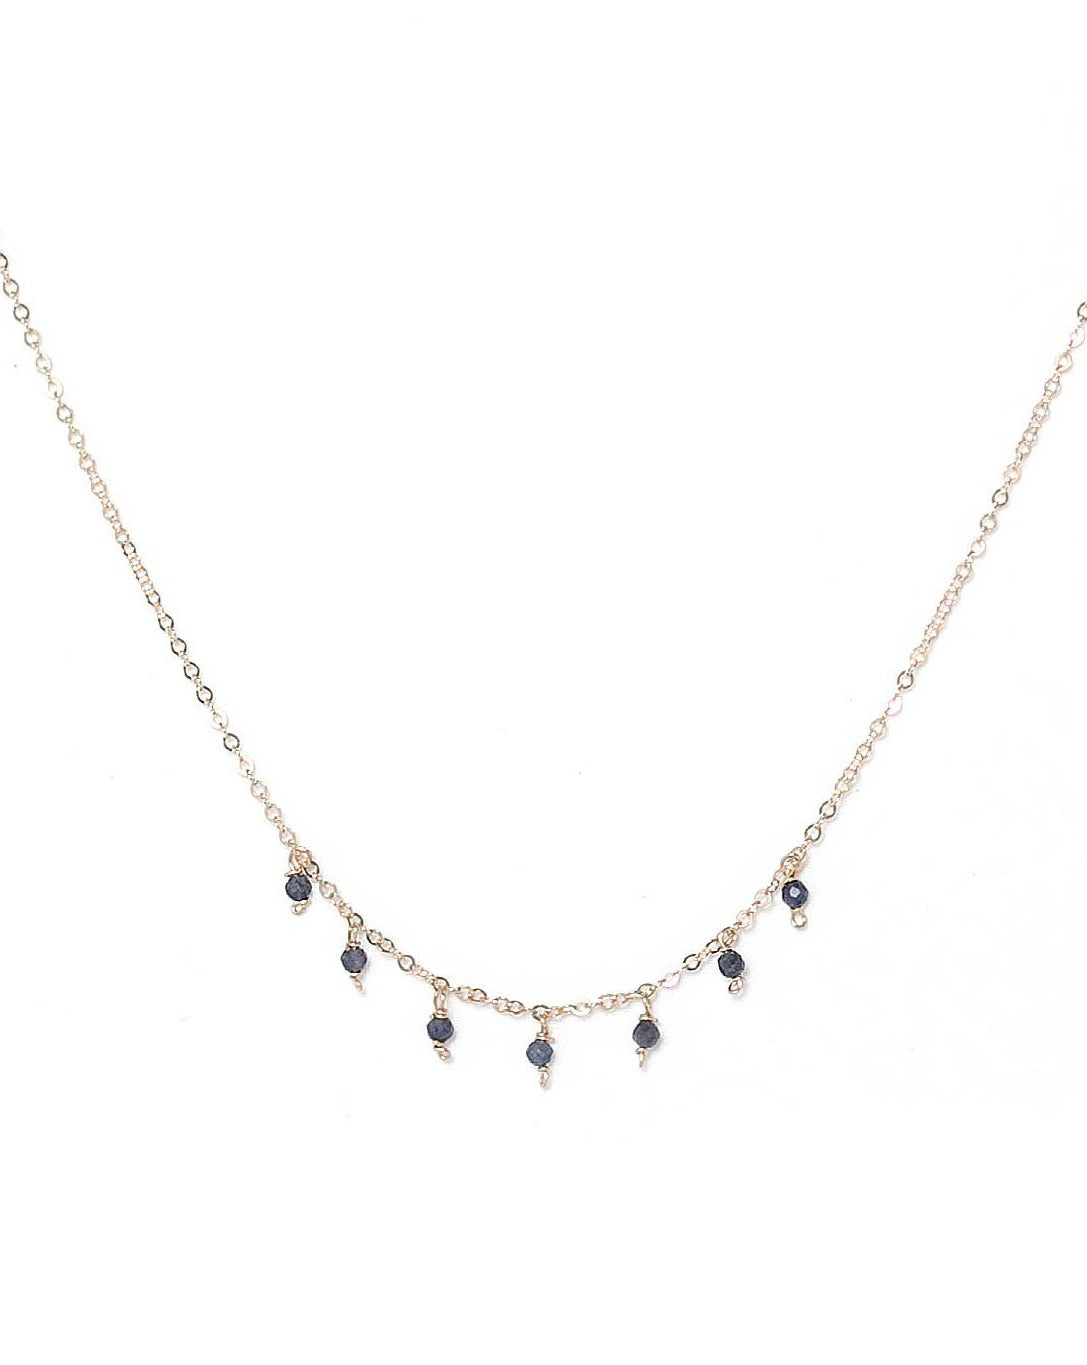 Cuy Necklace by KOZAKH. A 16 to 18 inch adjustable length necklace in 14K Gold Filled, featuring 2mm faceted round Sapphire gems.